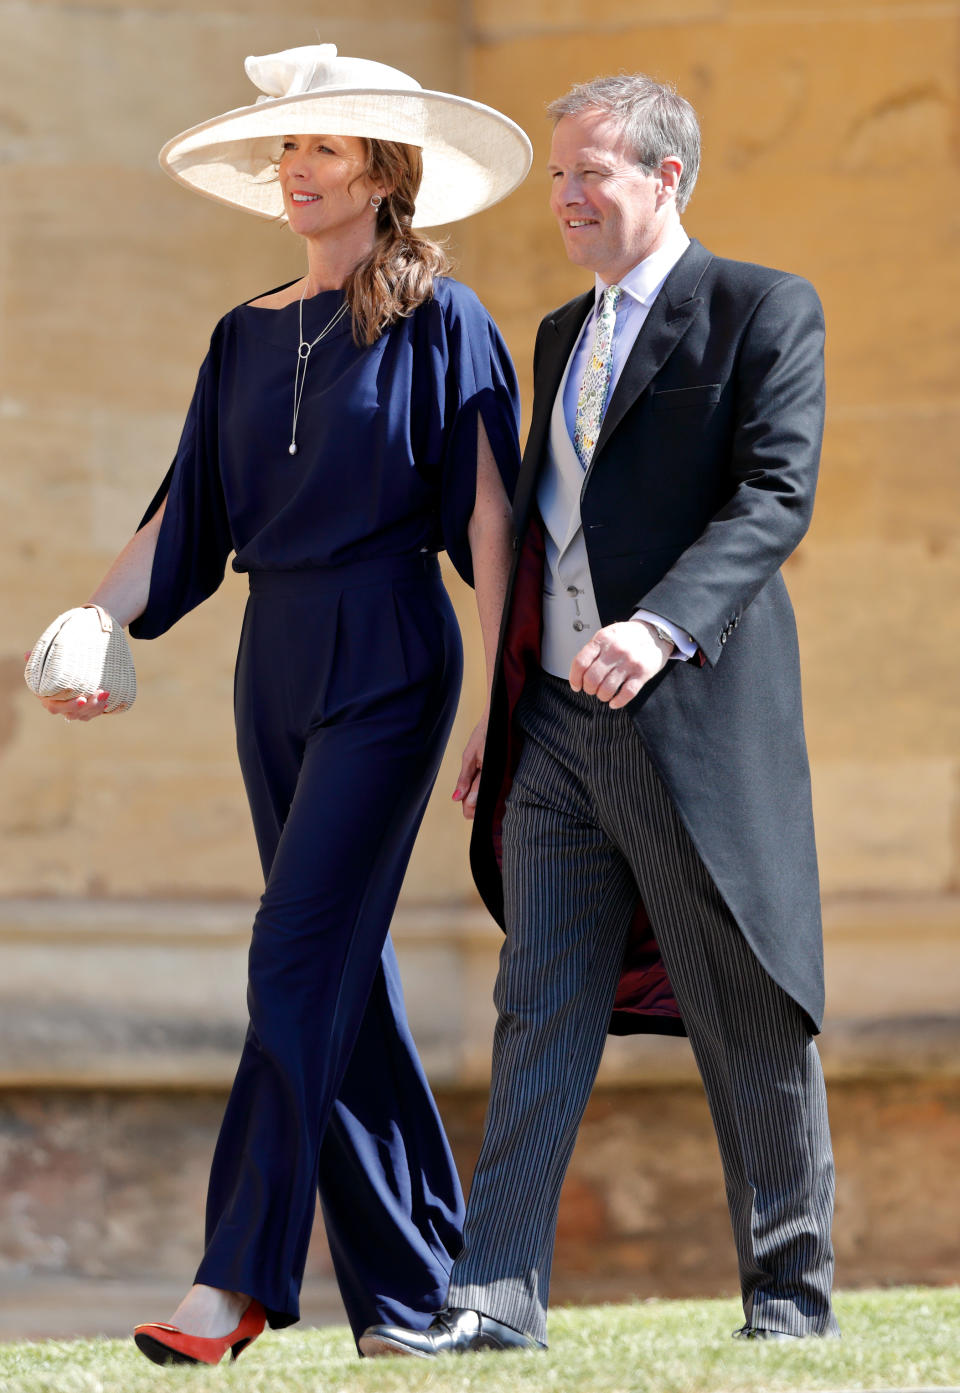 WINDSOR, UNITED KINGDOM - MAY 19: (EMBARGOED FOR PUBLICATION IN UK NEWSPAPERS UNTIL 24 HOURS AFTER CREATE DATE AND TIME) Claudia Bradby and Tom Bradby attend the wedding of Prince Harry to Ms Meghan Markle at St George's Chapel, Windsor Castle on May 19, 2018 in Windsor, England. Prince Henry Charles Albert David of Wales marries Ms. Meghan Markle in a service at St George's Chapel inside the grounds of Windsor Castle. Among the guests were 2200 members of the public, the royal family and Ms. Markle's Mother Doria Ragland. (Photo by Max Mumby/Indigo/Getty Images)